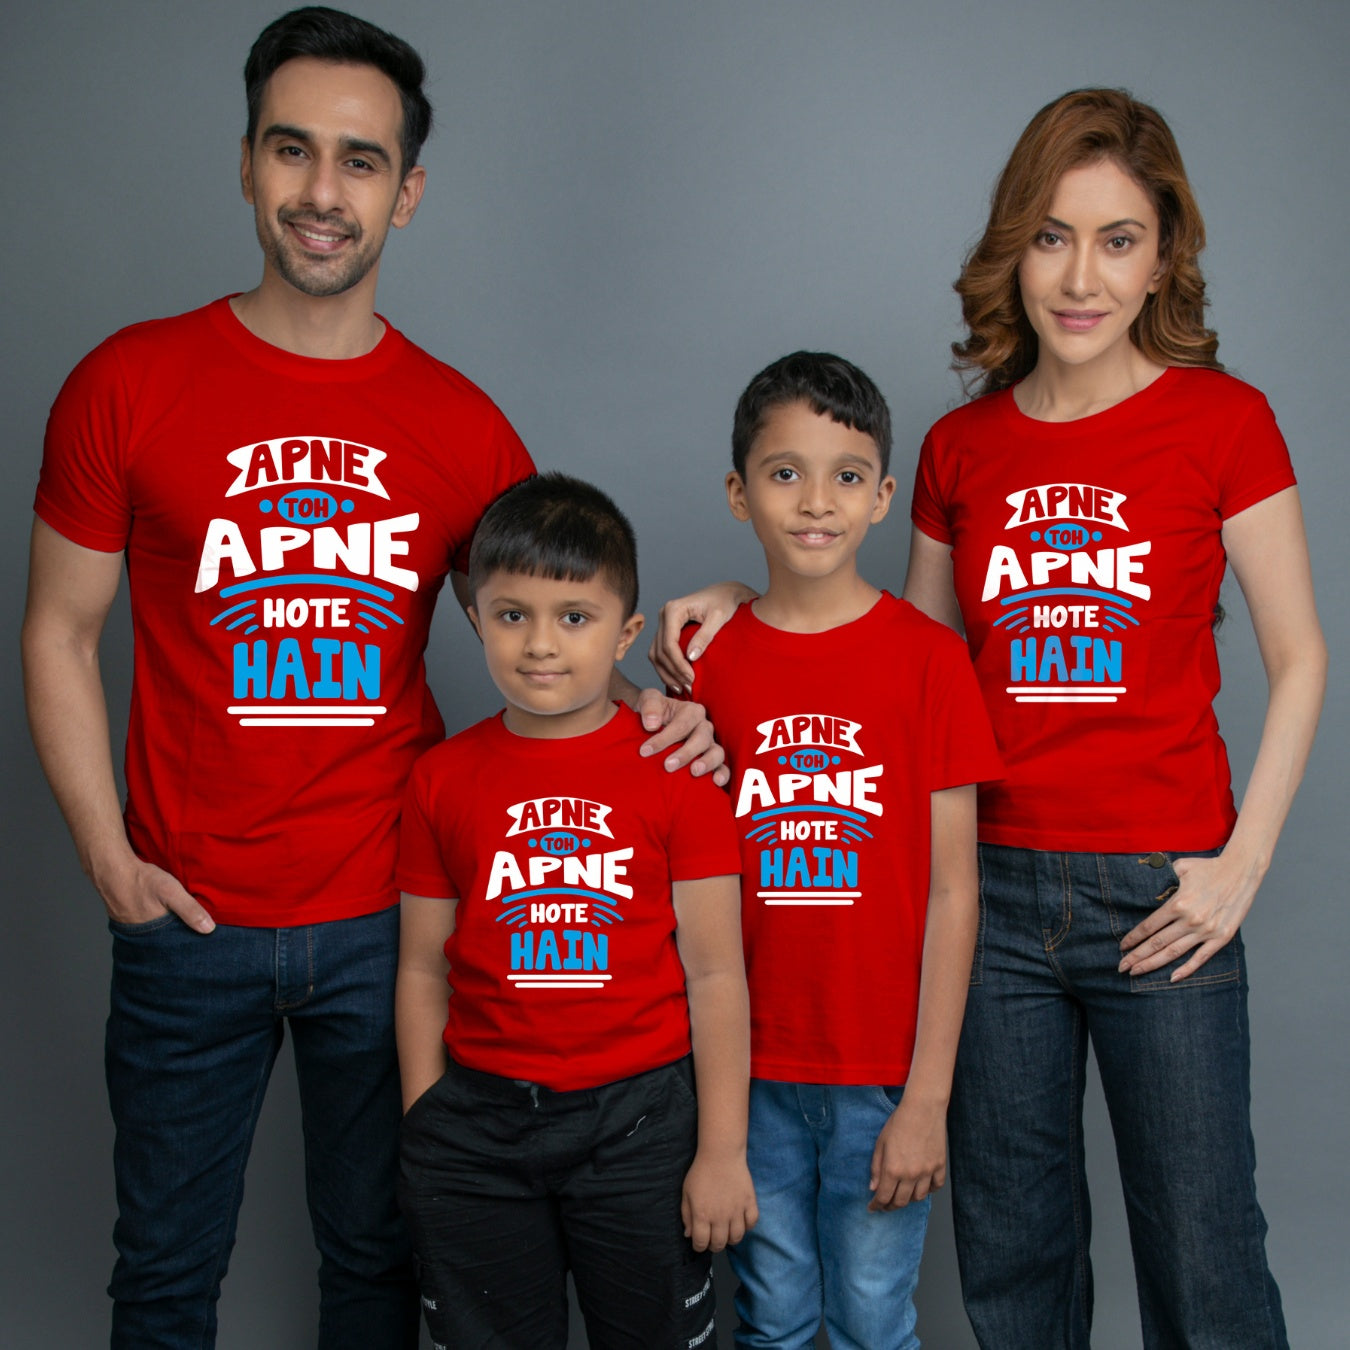 Family t shirts set of 4 Mom Dad Two Sons in Red Colour - Apne Toh Apne Hote Hain Variant